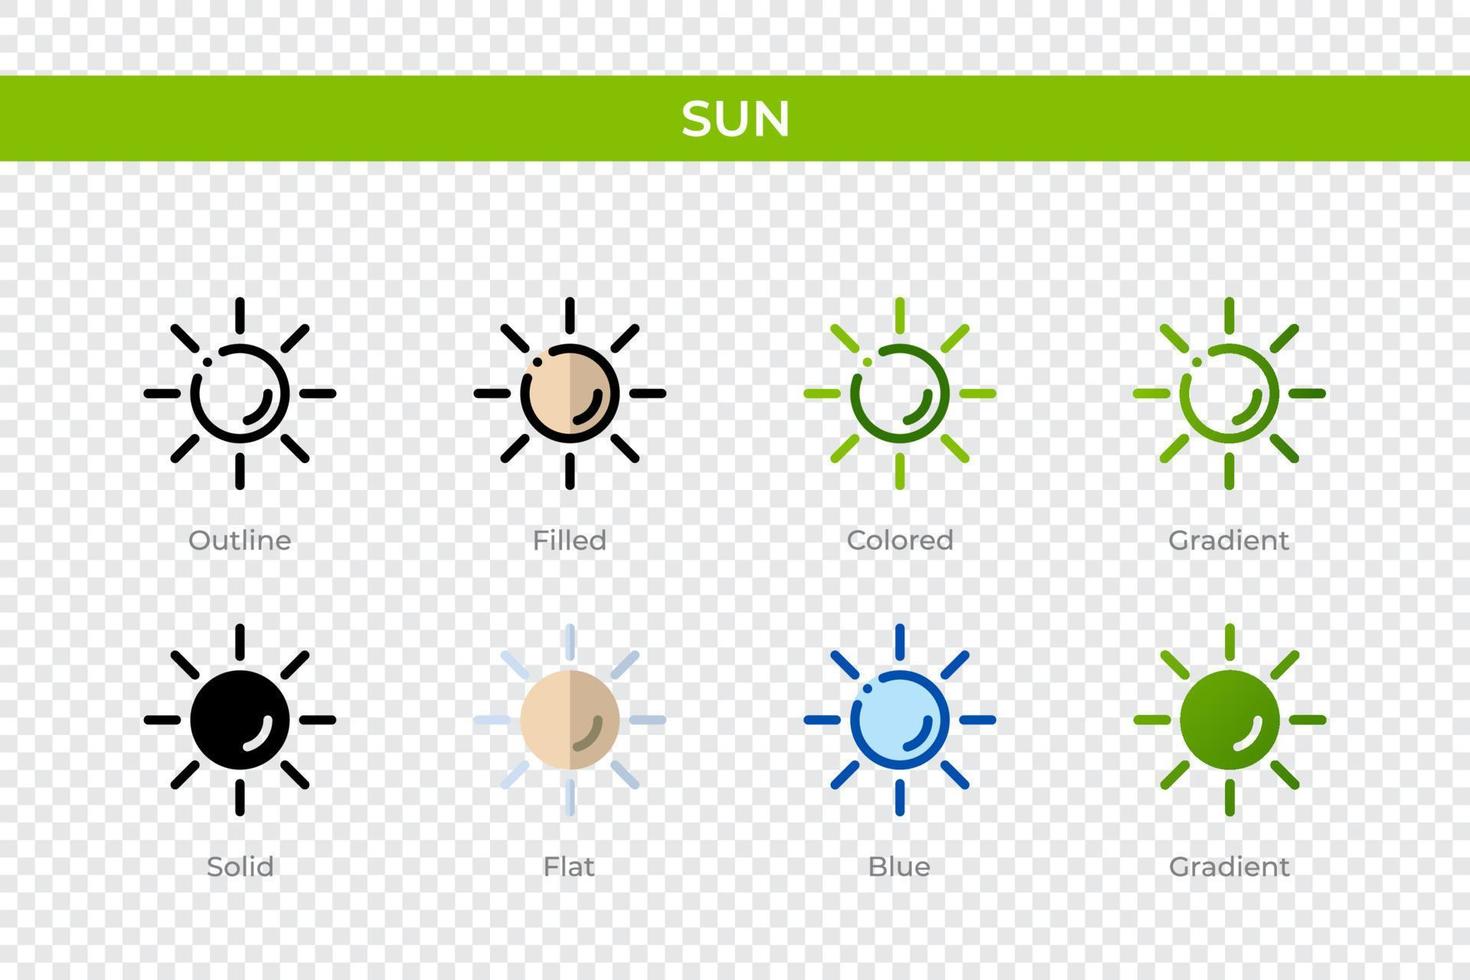 Sun icon in different style. Sun vector icons designed in outline, solid, colored, filled, gradient, and flat style. Symbol, logo illustration. Vector illustration